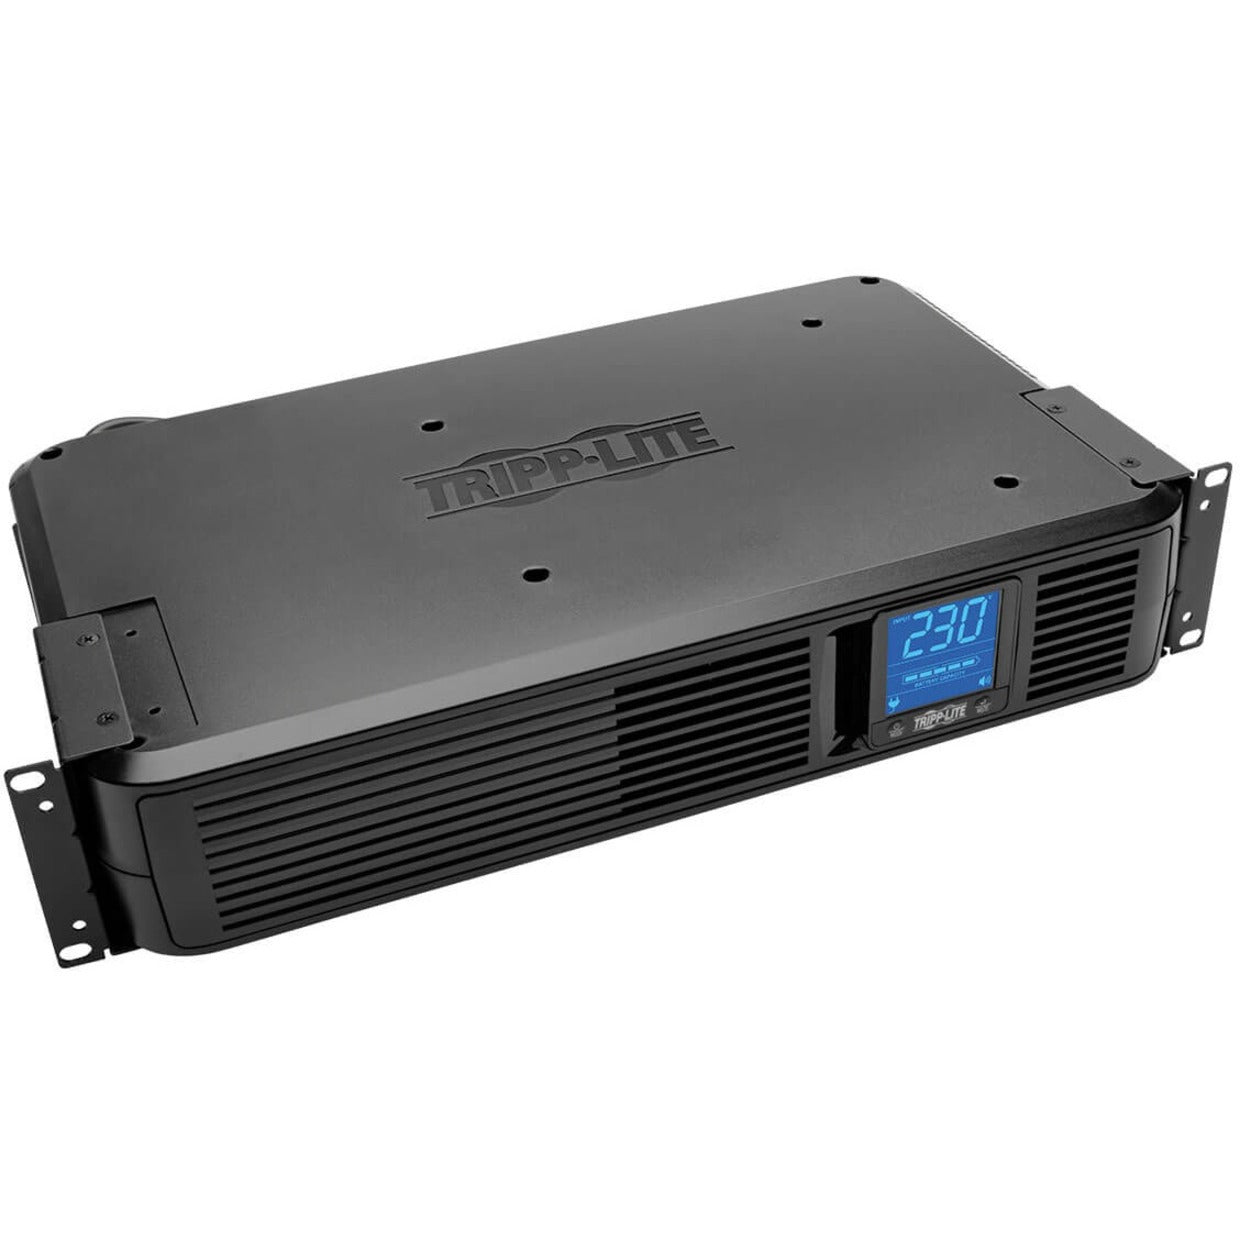 Tripp Lite SMX1500LCD SmartPro UPS 1500VA RT Coaxial Cable Line Protection